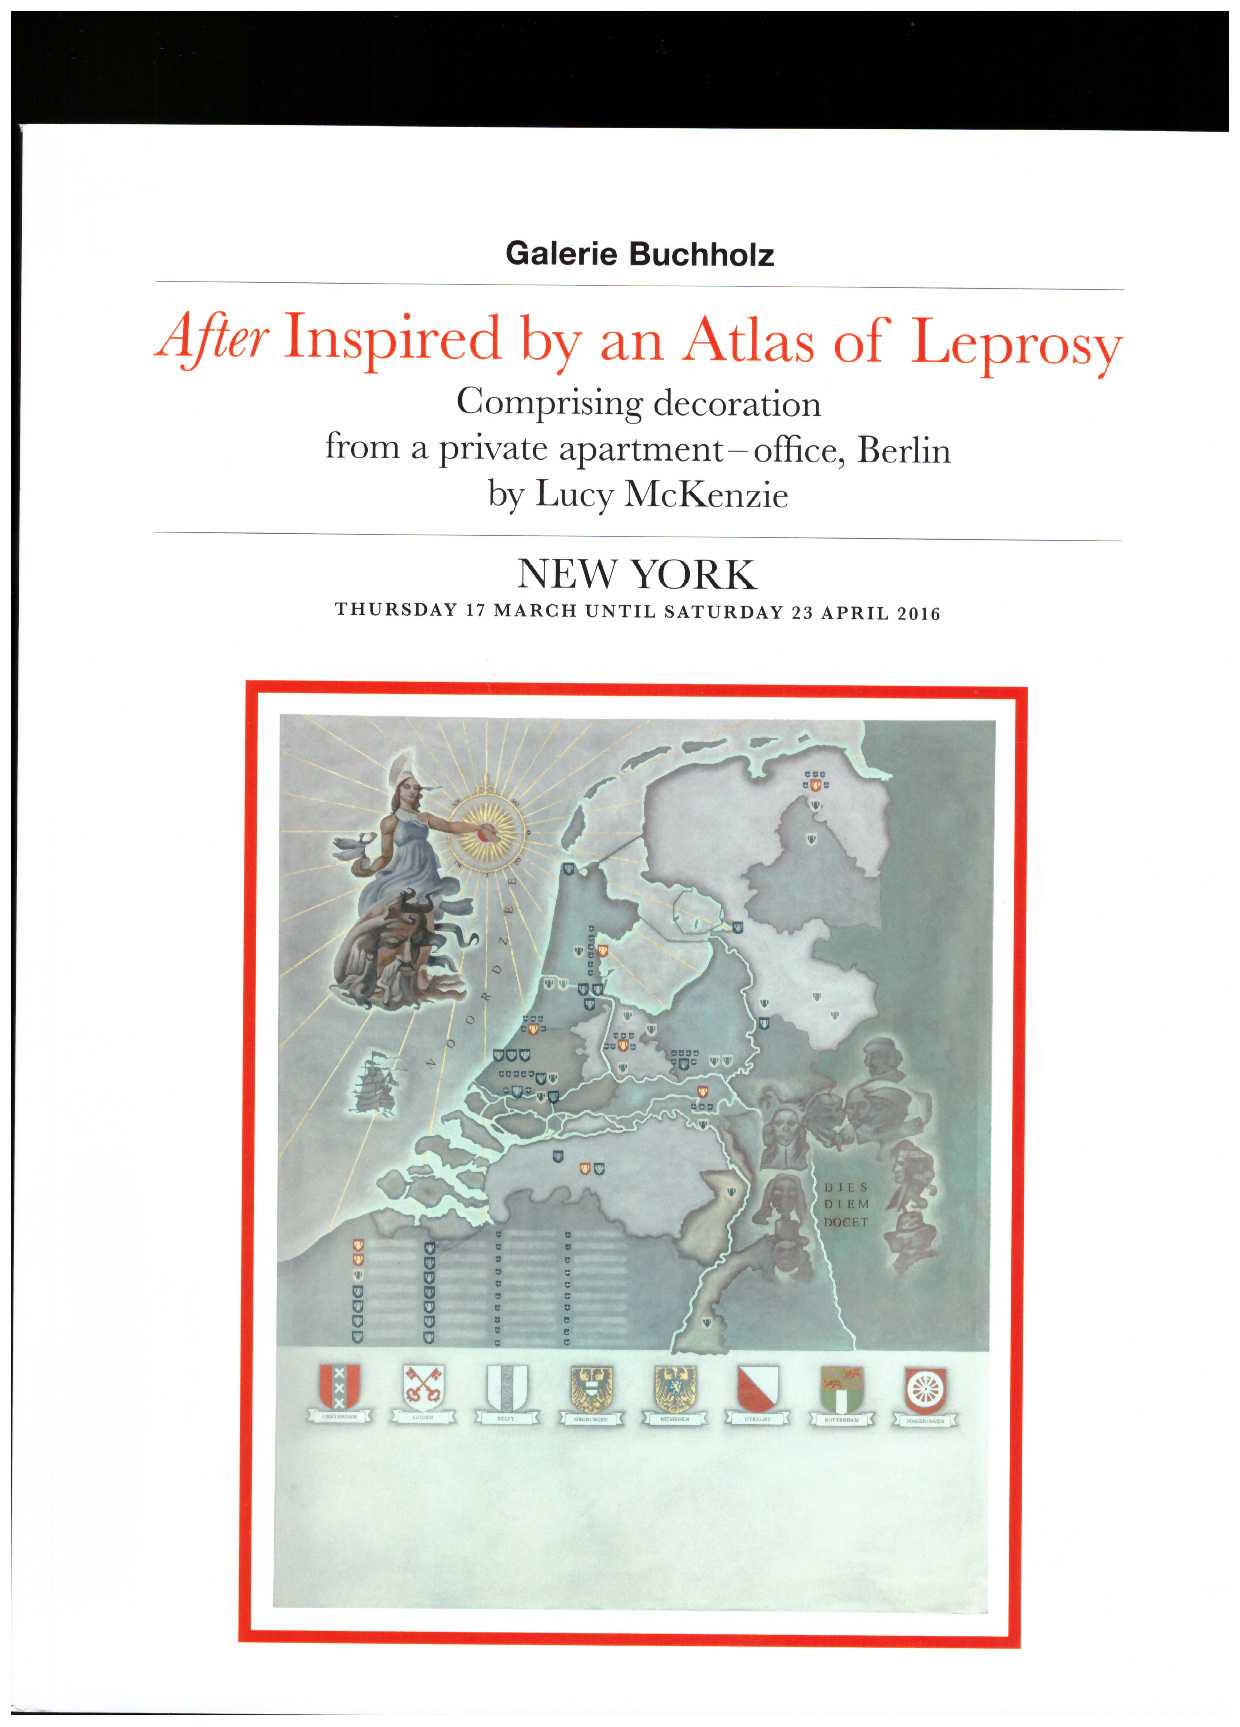 McKENZIE, Lucy - After. Inspired by an Atlas of Leprosy